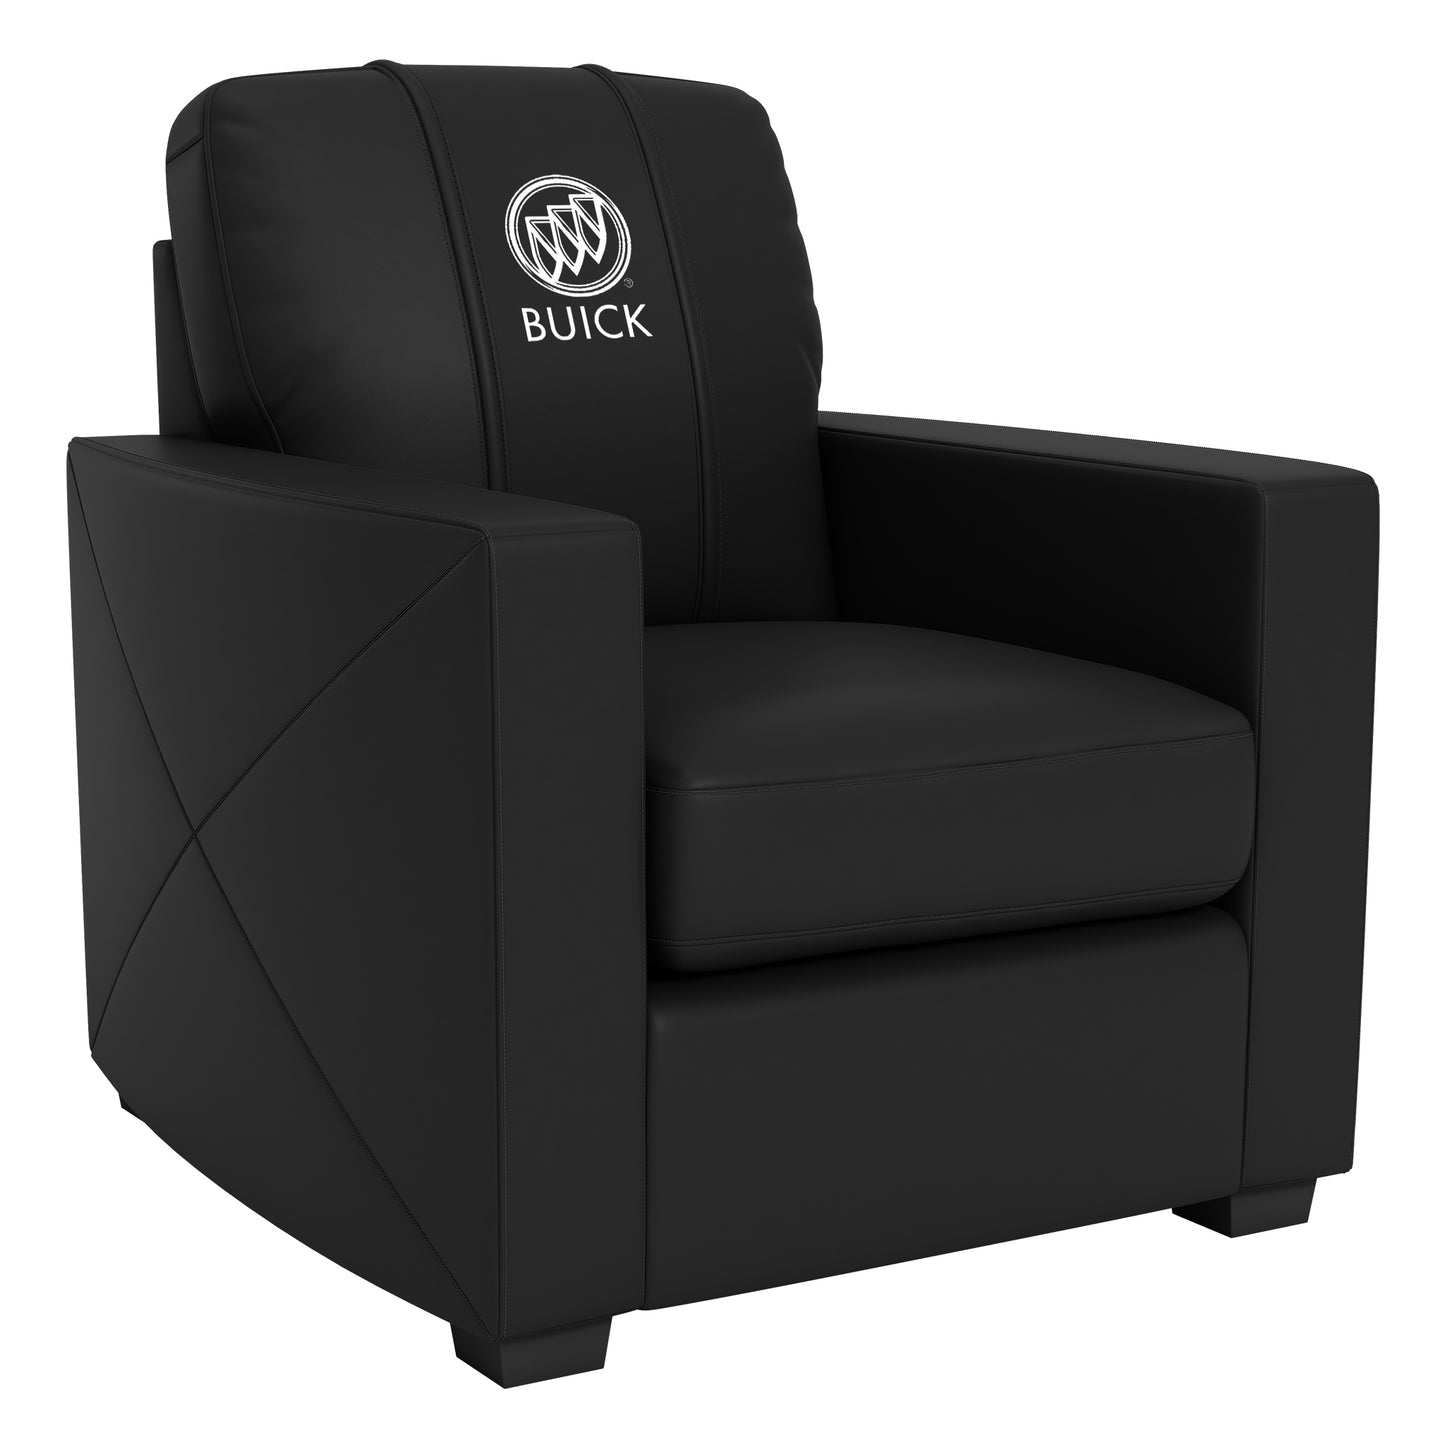 Silver Club Chair with Buick Logo